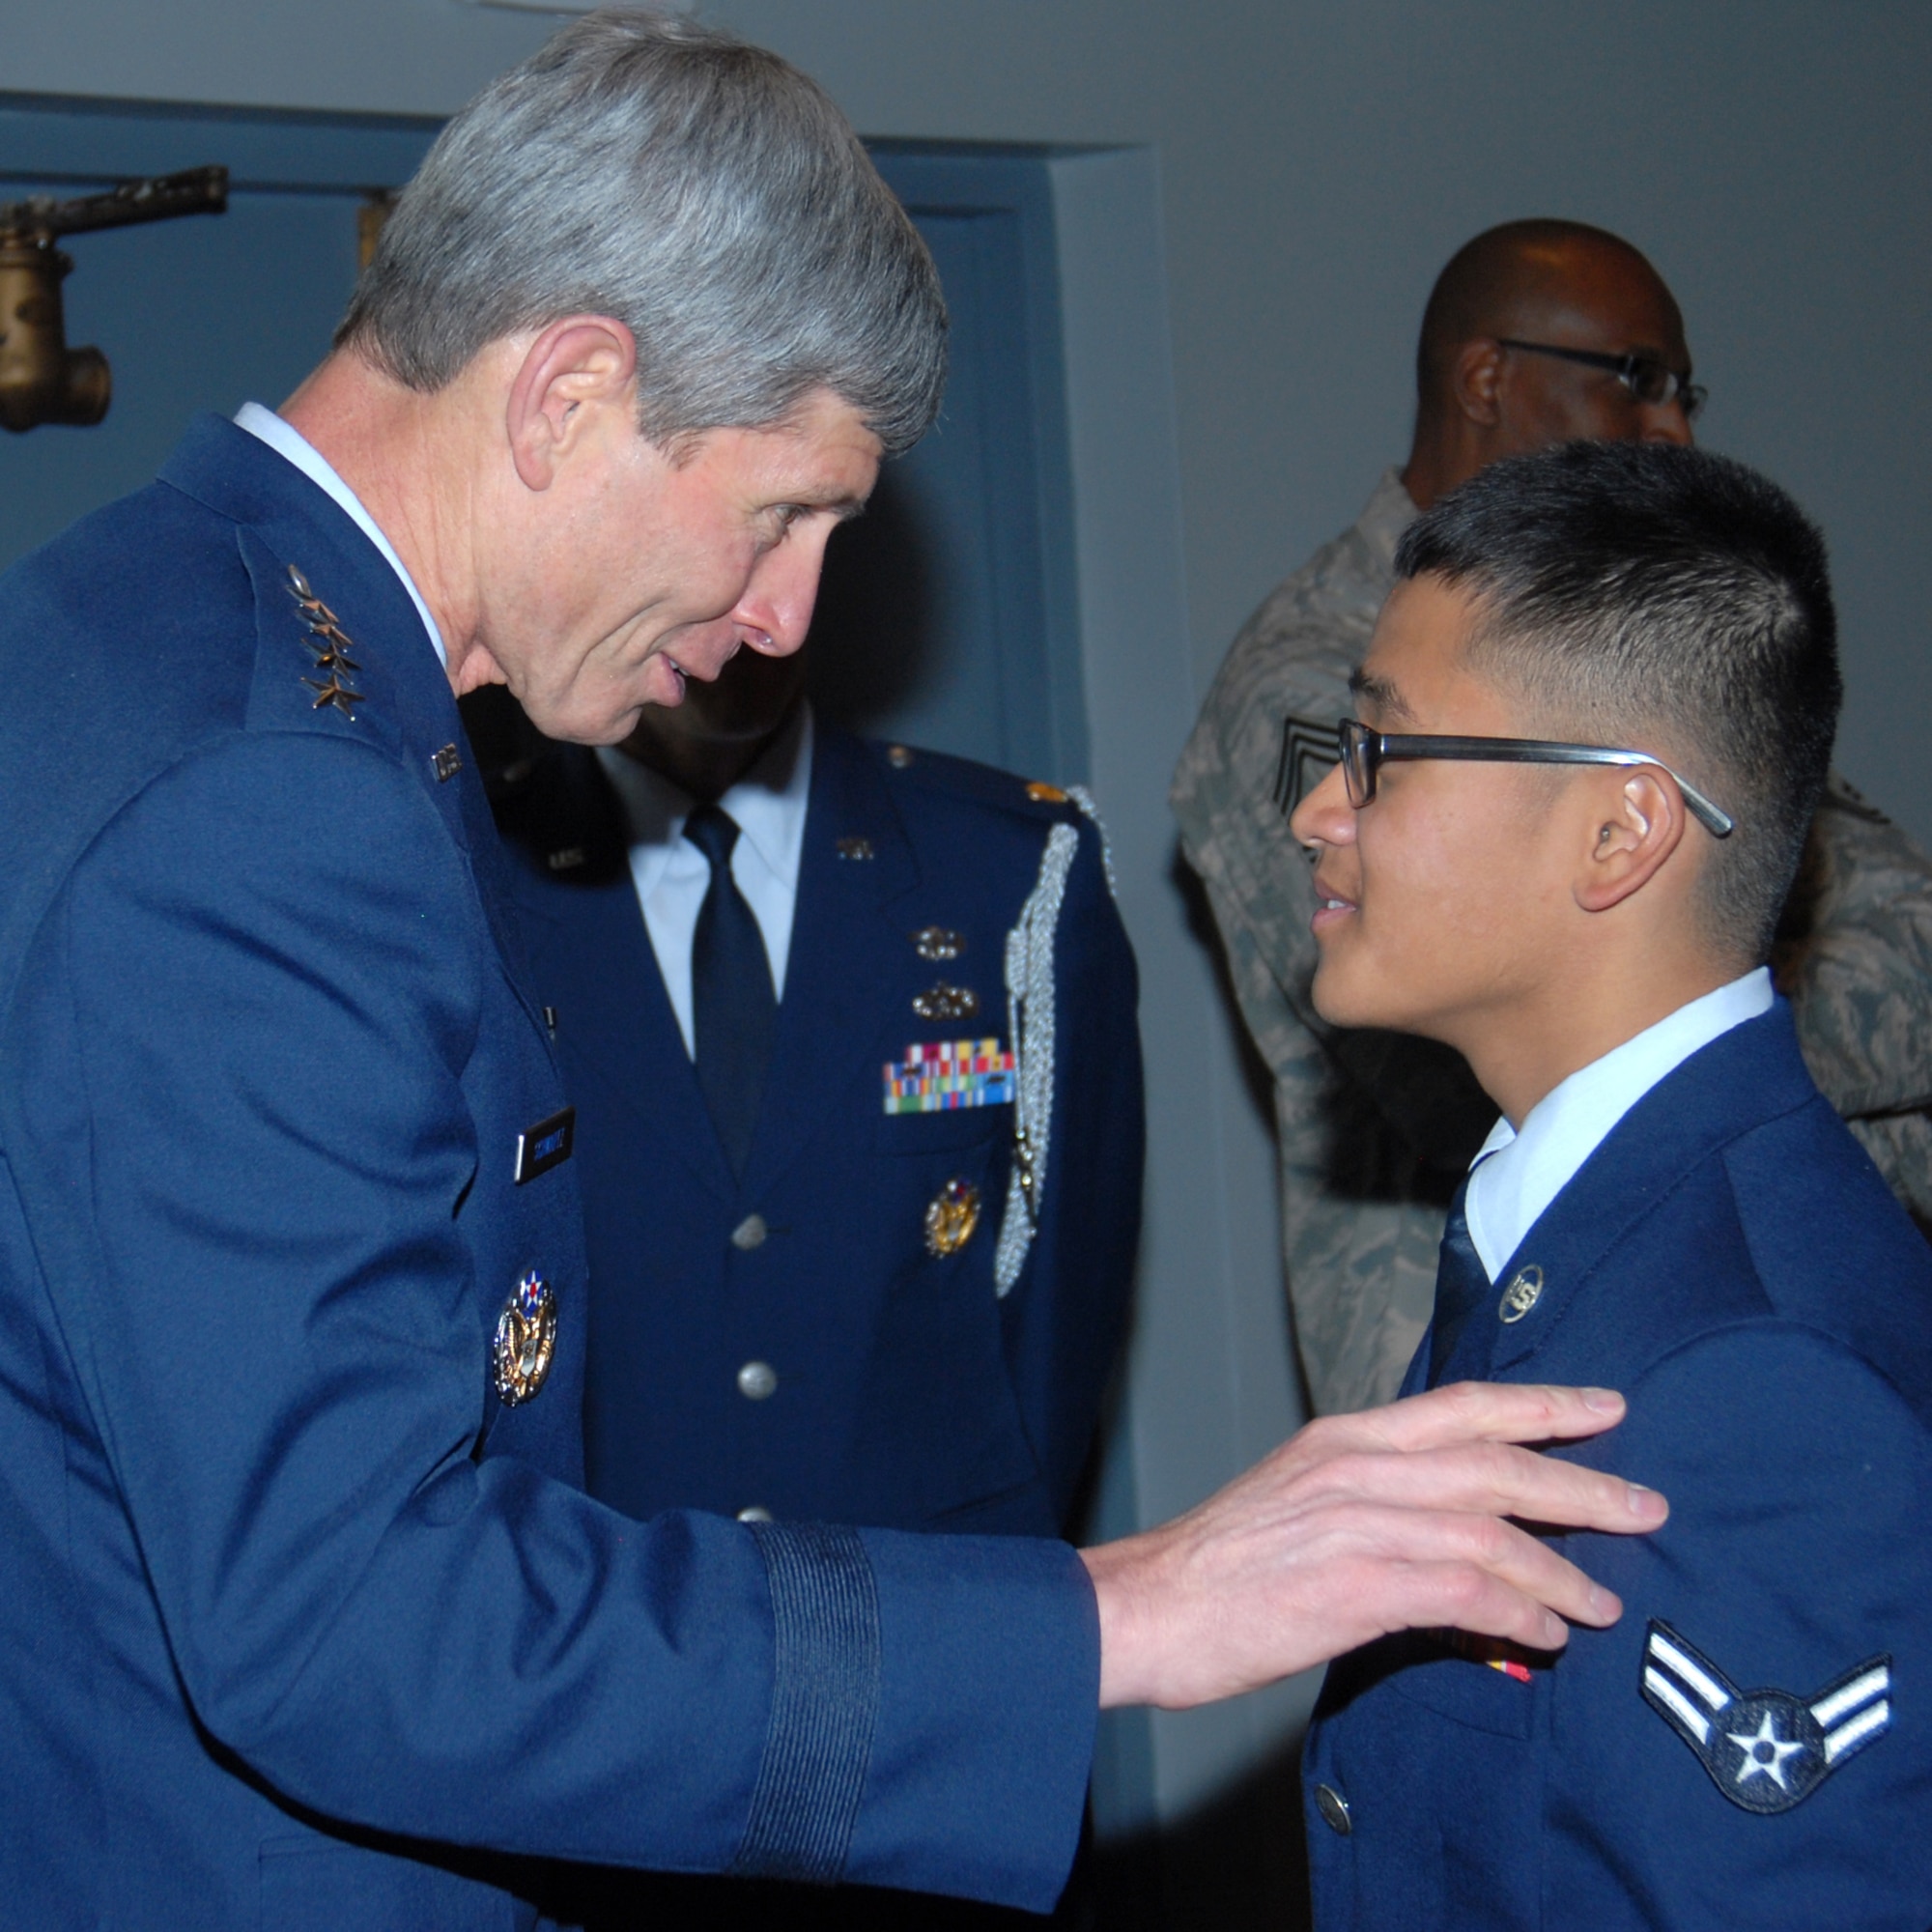 Air Force Chief of Staff Gen. Norton A. Schwartz talks with Airman 1st Class Jeremiles Vesey, 90th Logistics Readiness Squadron, during Chief Master Sgt. Al Martinez’ retirement ceremony in the Pronghorn Center Wednesday. Airman Vesey is the youngest Airman at Warren, and he presented Chief Martinez with a retirement coin. (Photo by Berni Ernst)